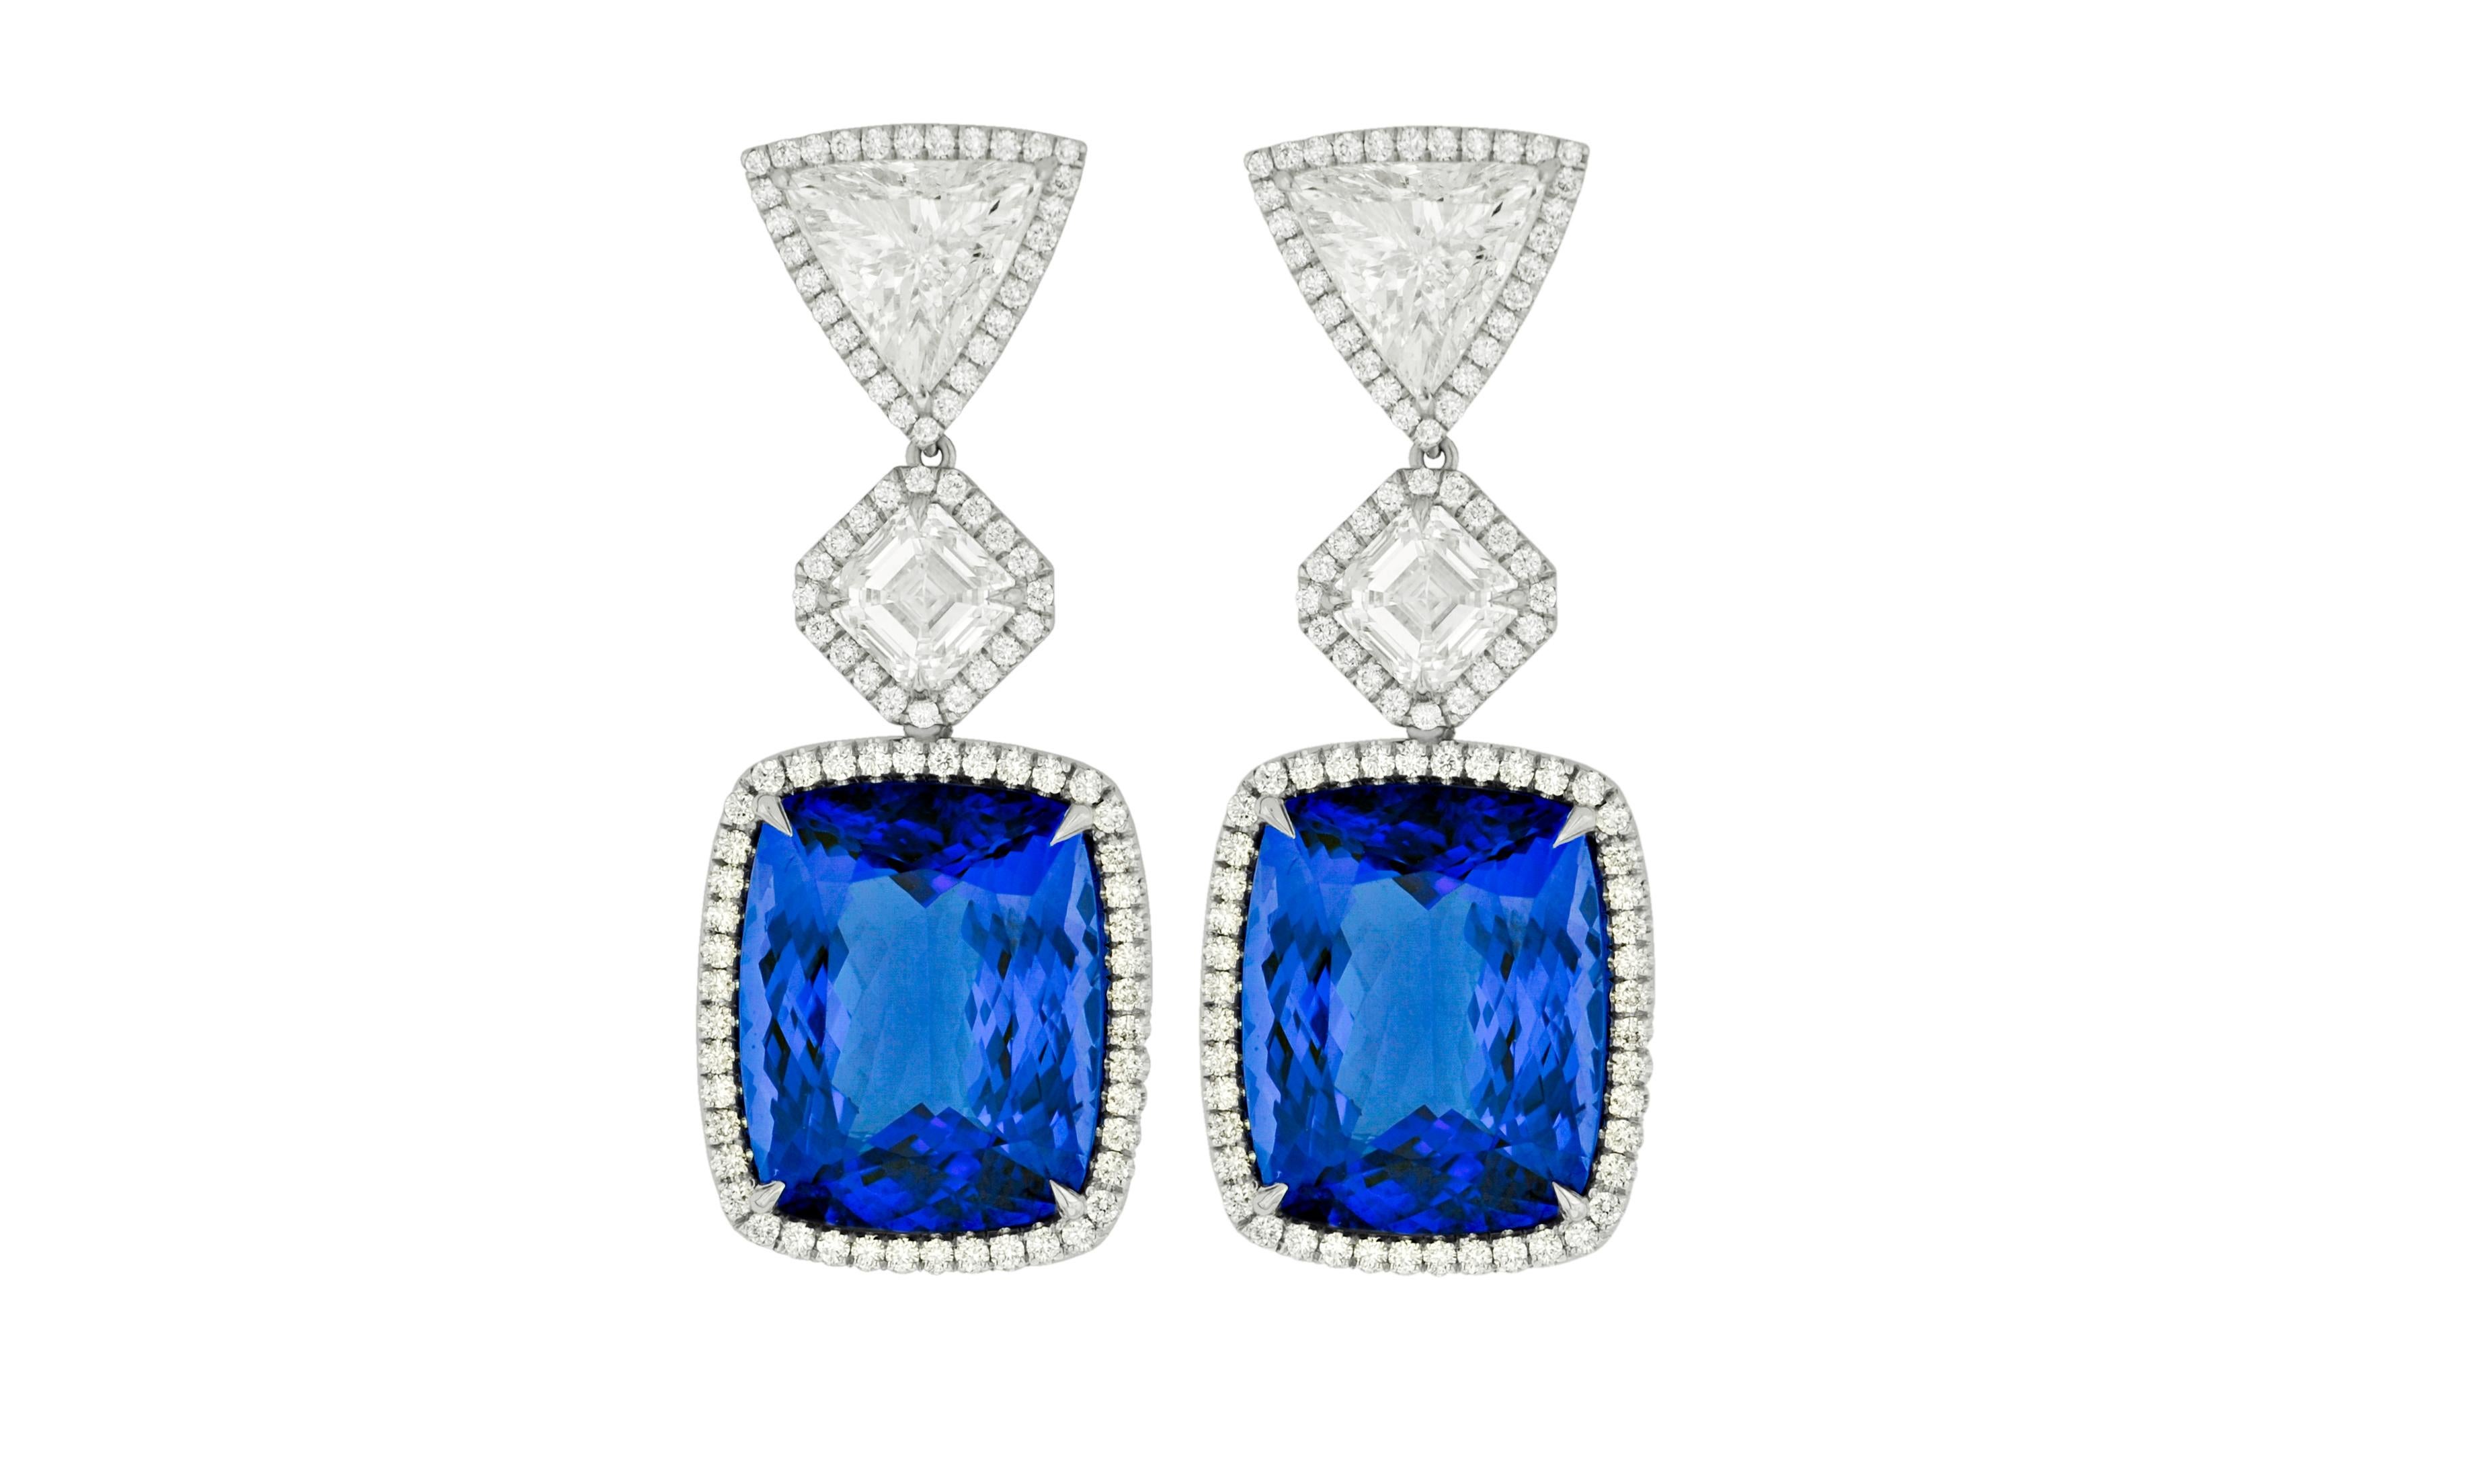 Exquisite, one-of-a-kind rare color Tanzanite and diamond earrings set with all GIA Certified Diamonds. 
33.79 Carats of Cushion Cut Tanzanites, (16.89 Carats and 16.90 Carats)  with very Rare Violetish Blue color.
Set with two GIA Certified Asscher